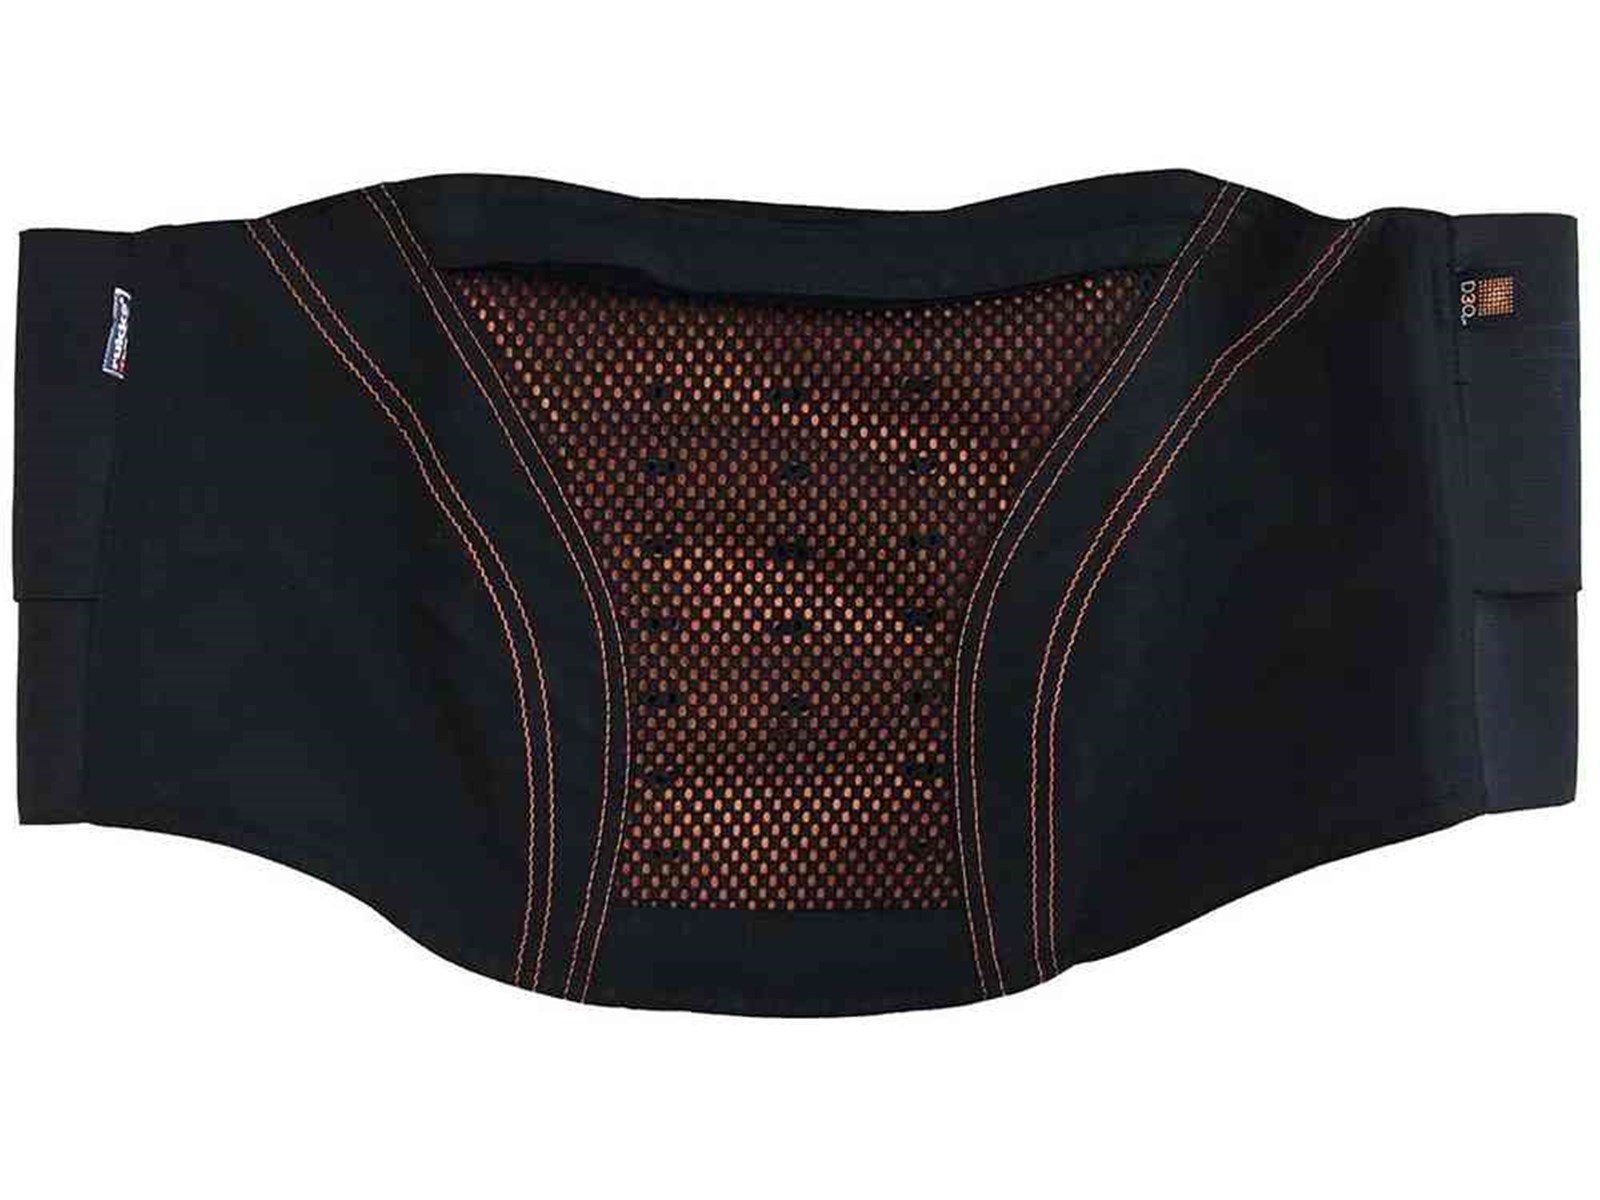 LOWER BACK PROTECTOR M